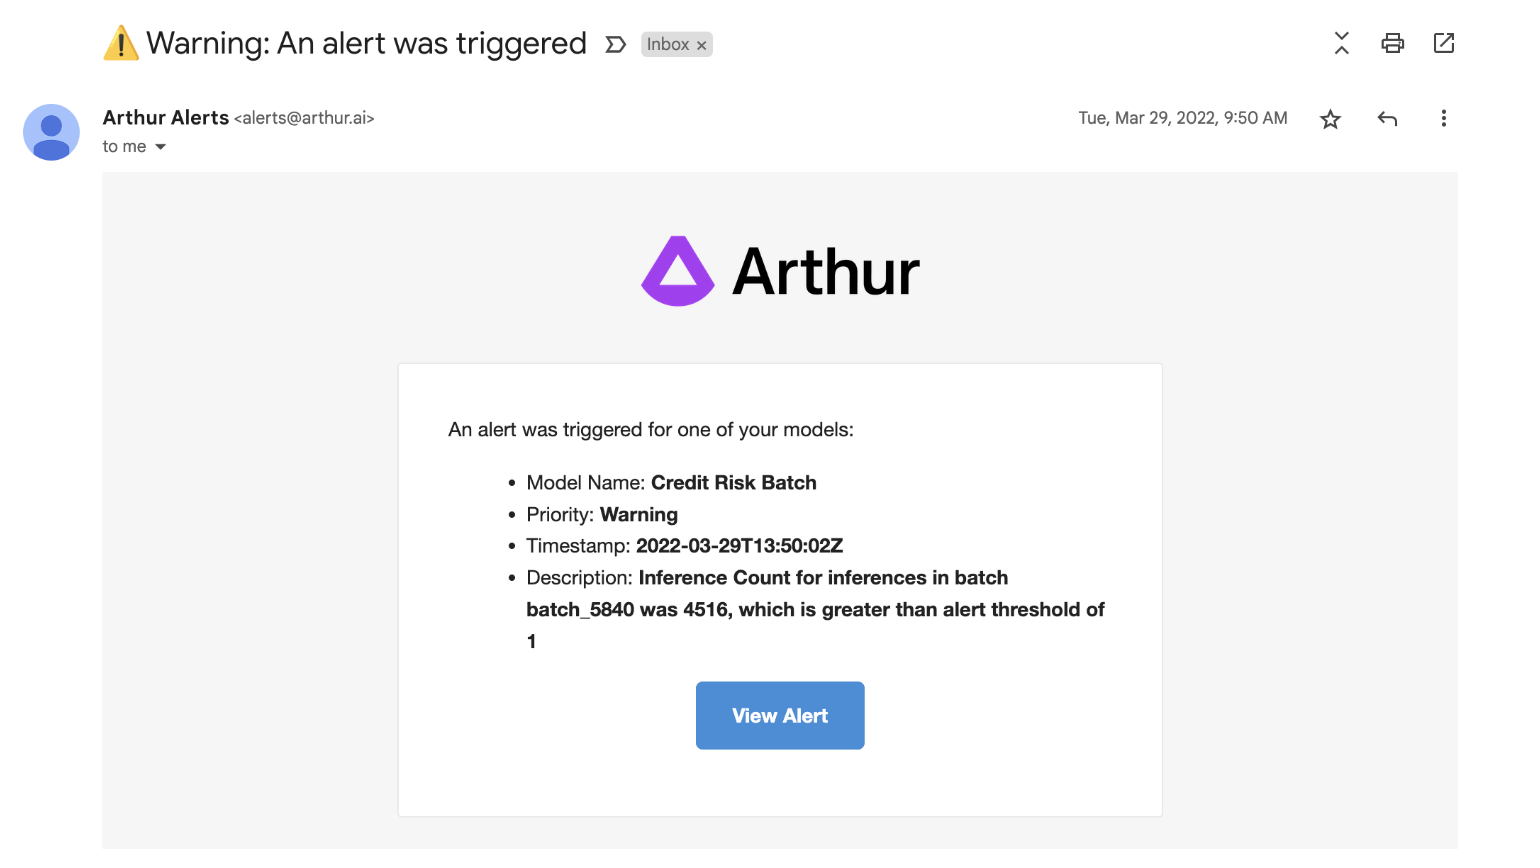 An example of an email alert notification sent by Arthur